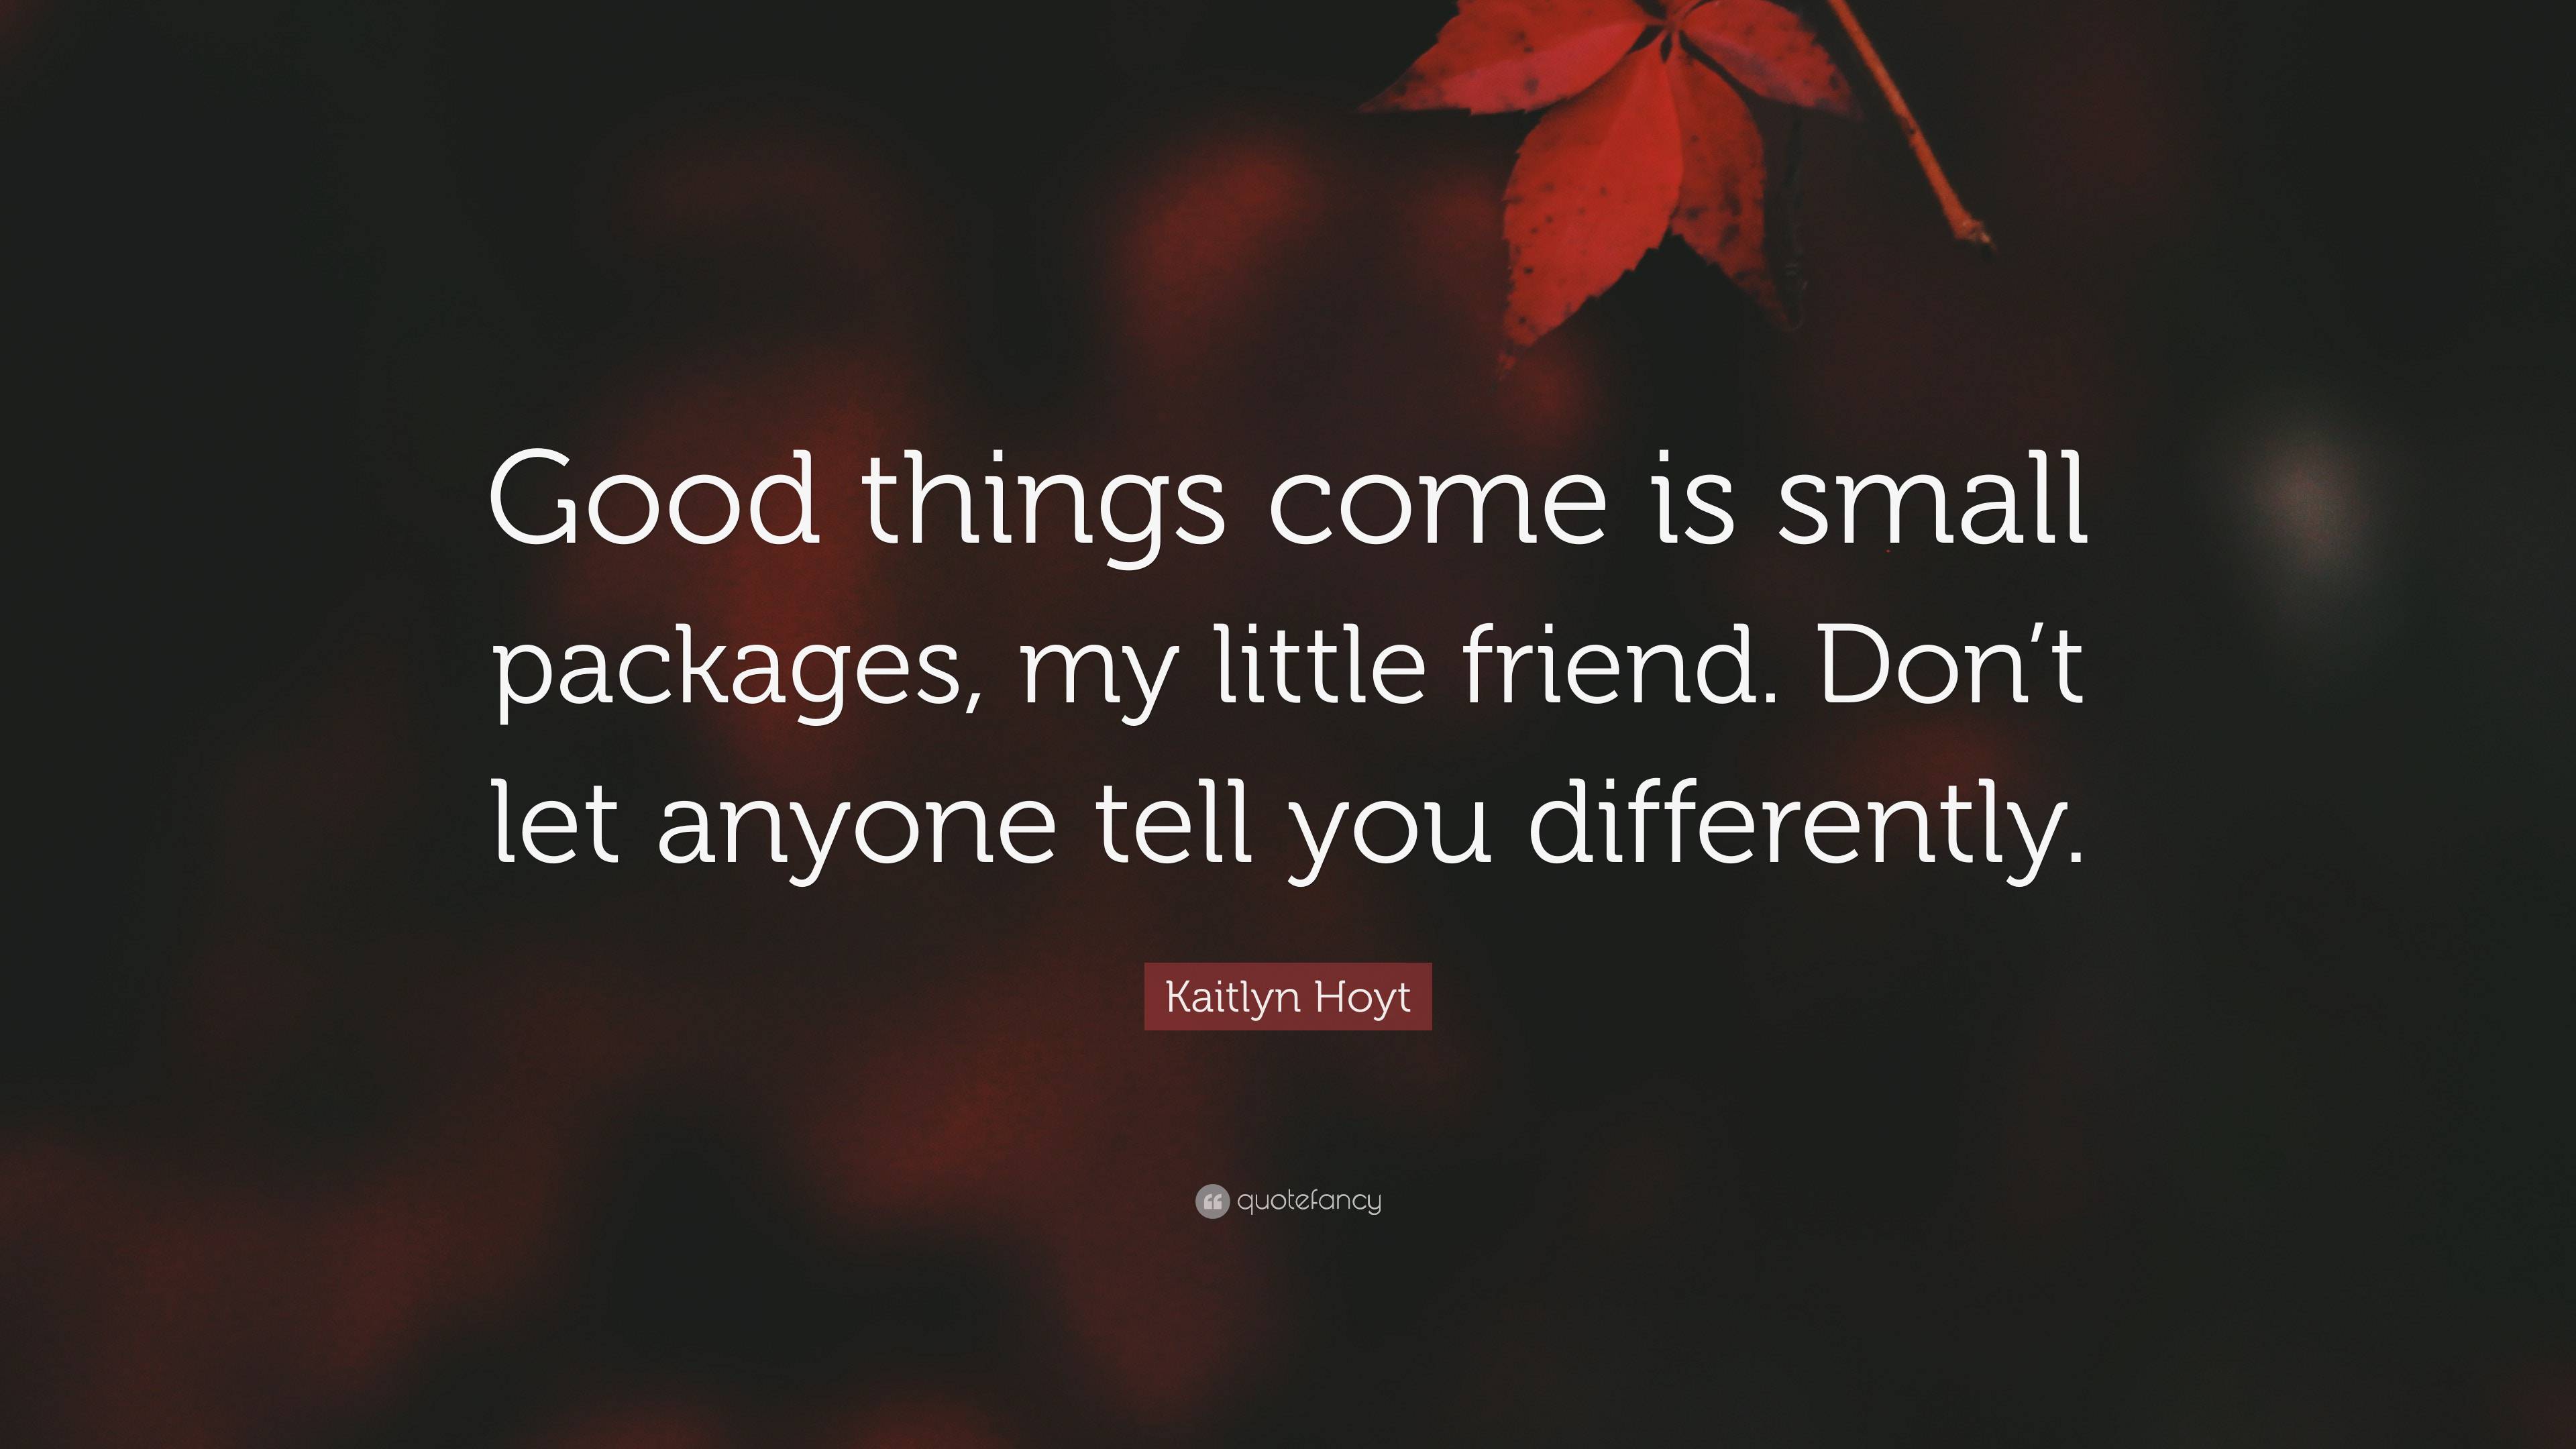 https://quotefancy.com/media/wallpaper/3840x2160/7423112-Kaitlyn-Hoyt-Quote-Good-things-come-is-small-packages-my-little.jpg